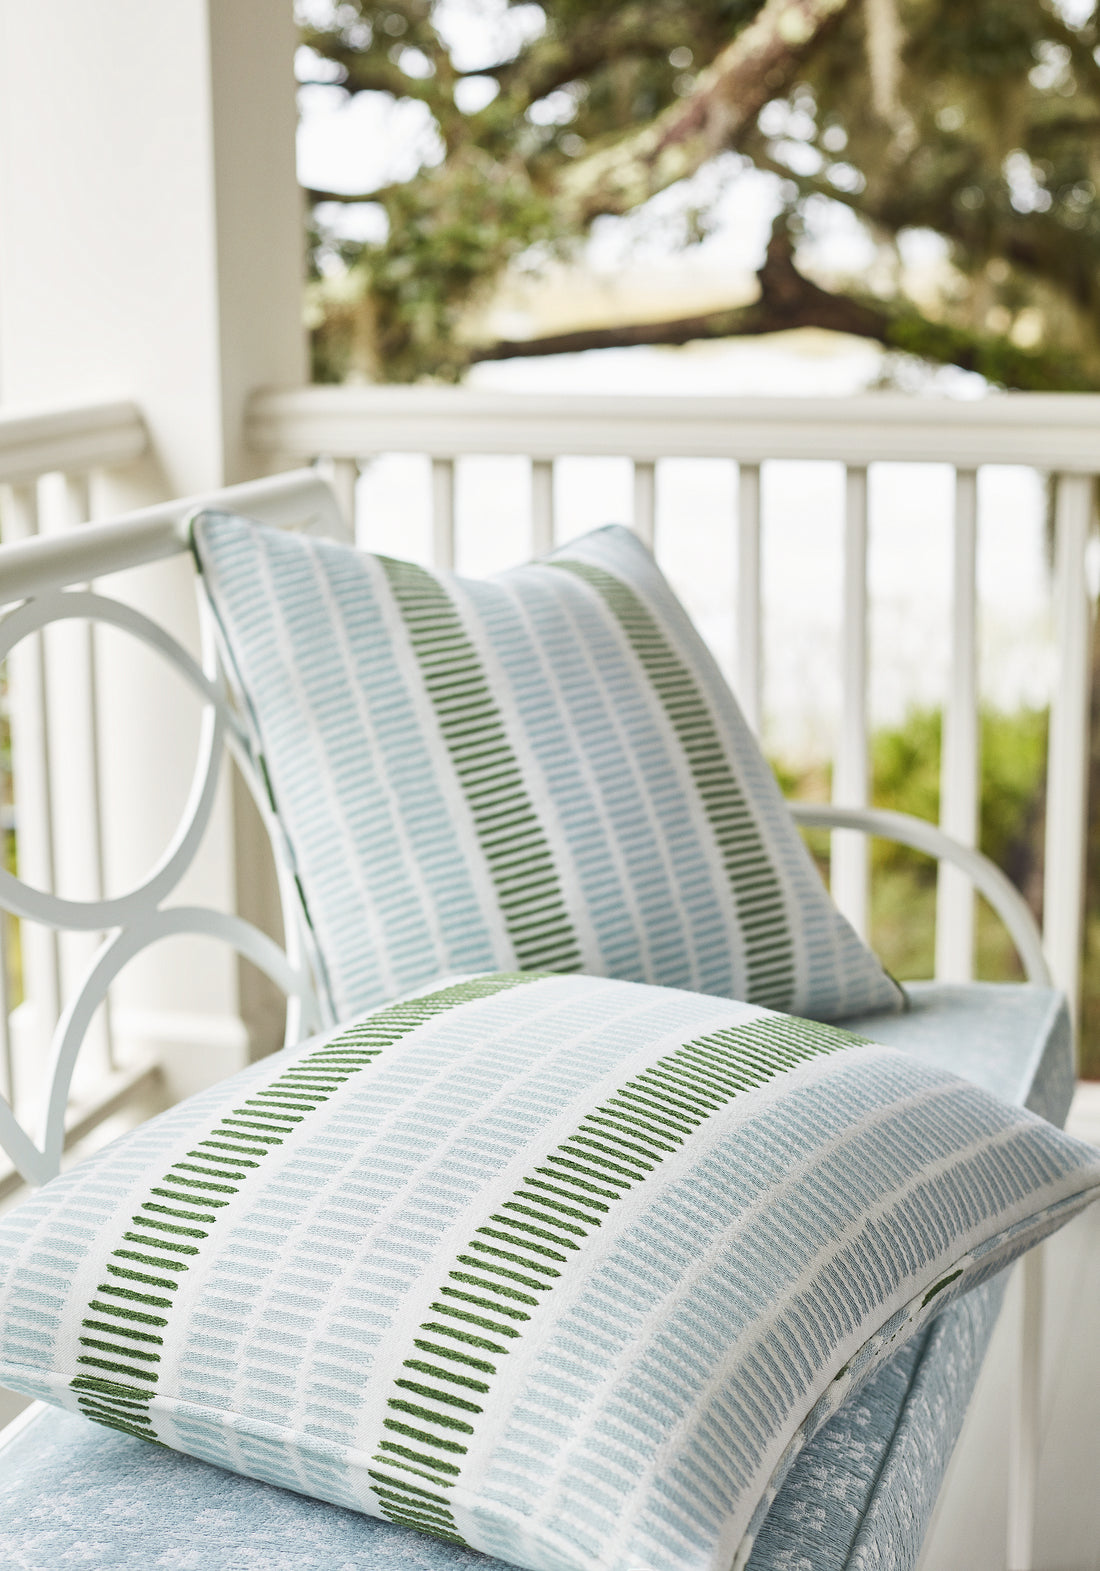 Pillows in Topsail Stripe woven fabric in seafoam and kelly green color - pattern number W73517 by Thibaut in the Landmark collection